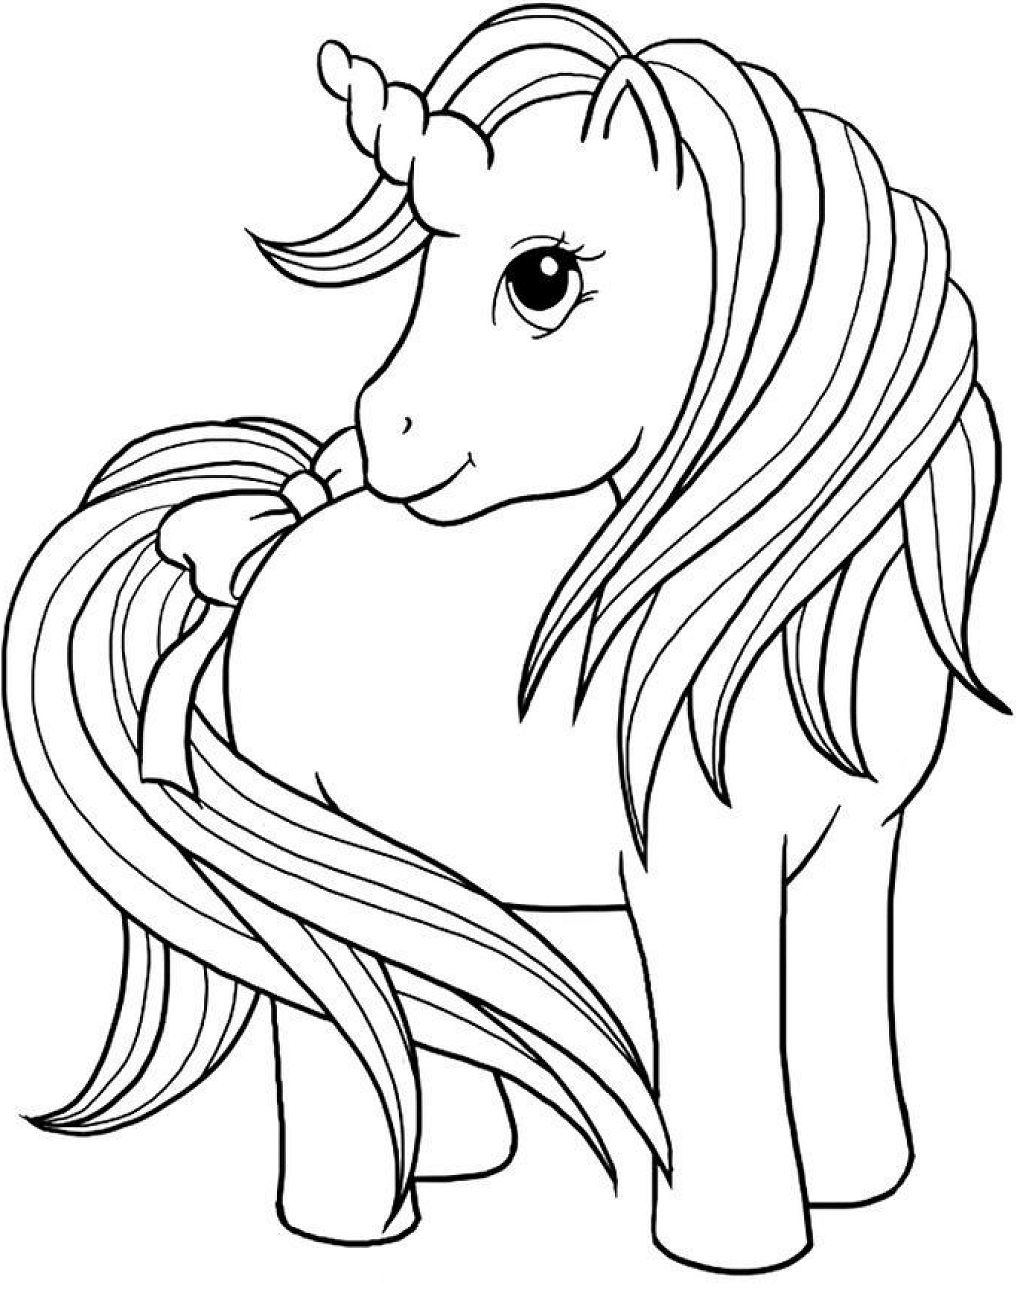  Unicorn  With Bow At Tail Coloring  Page  Free Printable 